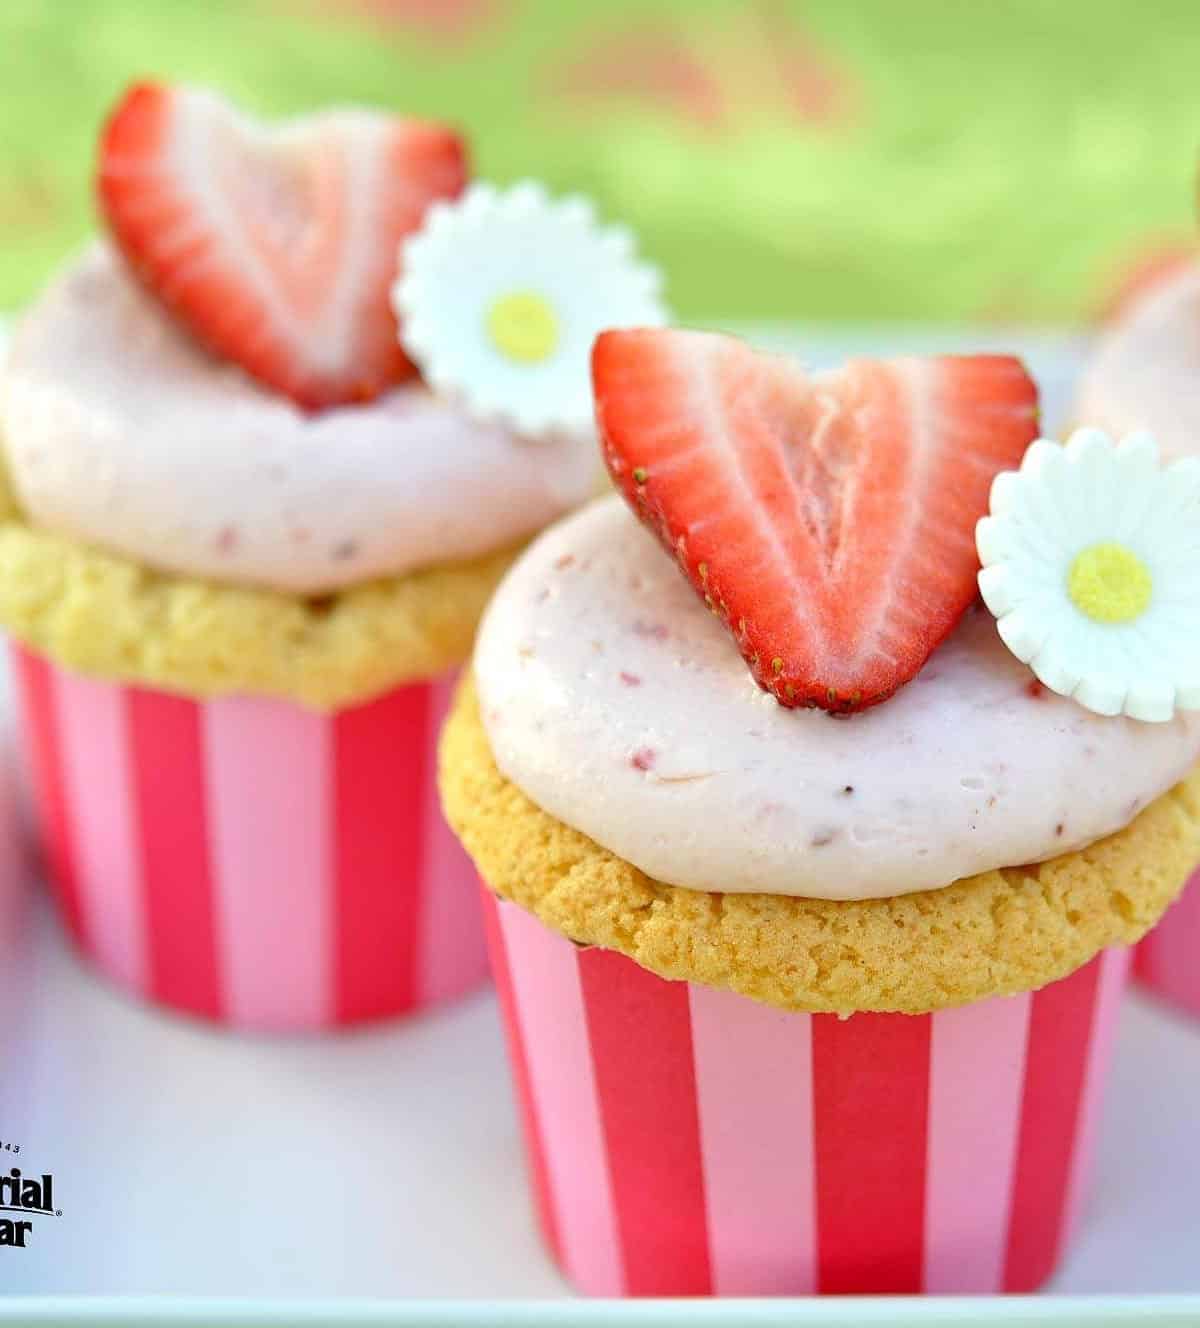  Amaze your friends and family with these beautiful and scrumptious Fresh Strawberry Icelandic Skyr Yogurt Cupcakes!